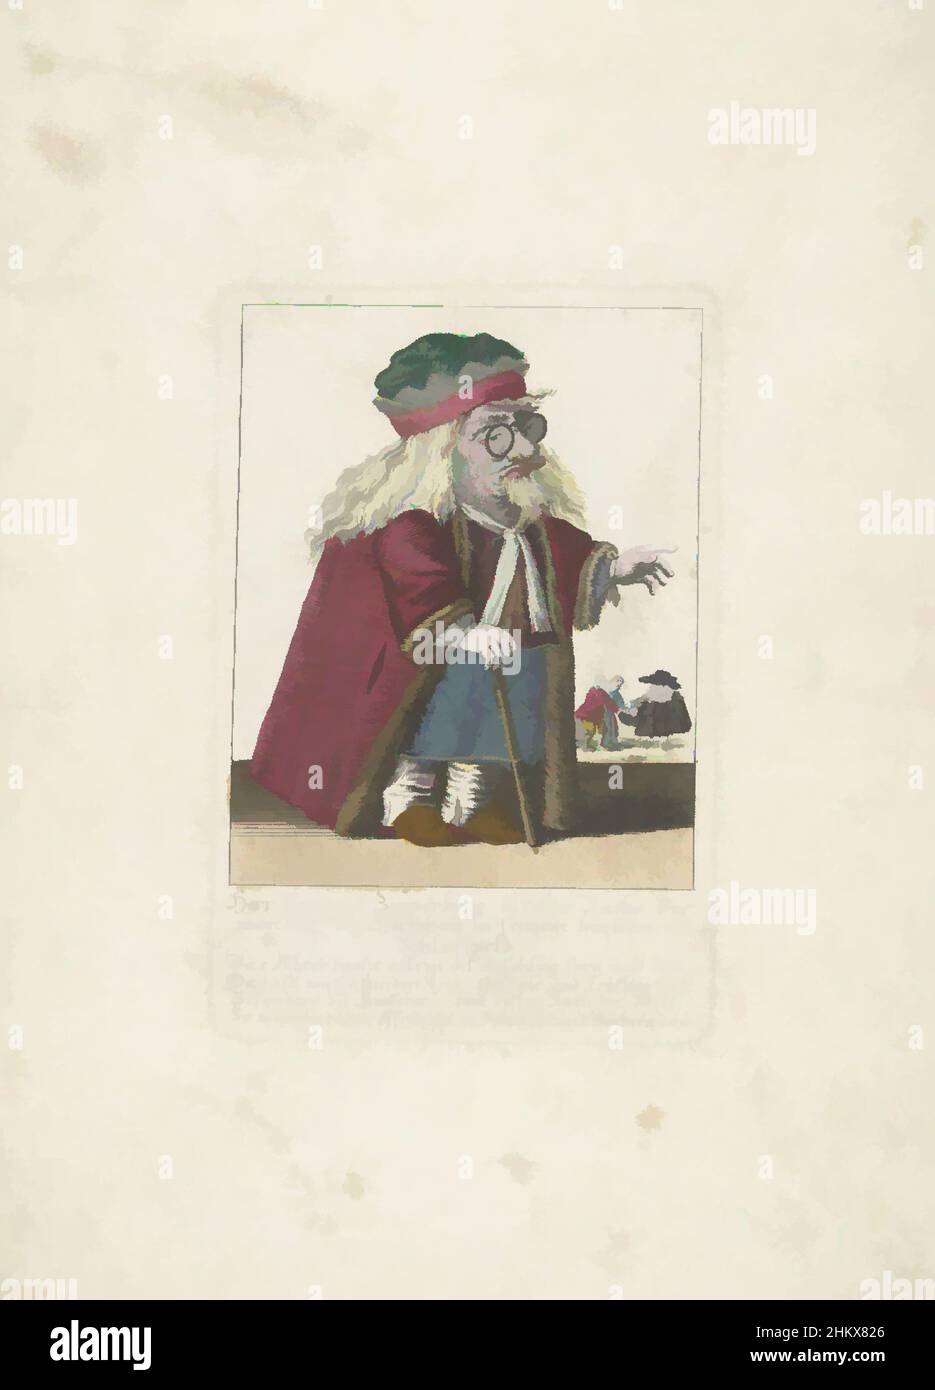 Art inspired by The dwarf Vincentz Zipperling in a fur coat, c. 1710, Herr Vincentz Zipperling, ältester Raths verwandter zu Hirschau in seinem bequemen Schlaffpelz, Il Callotto resurcitato oder Neu eingerichtes Zwerchen Cabinet (series title), The dwarf Vincentz Zipperling in a fur, Classic works modernized by Artotop with a splash of modernity. Shapes, color and value, eye-catching visual impact on art. Emotions through freedom of artworks in a contemporary way. A timeless message pursuing a wildly creative new direction. Artists turning to the digital medium and creating the Artotop NFT Stock Photo